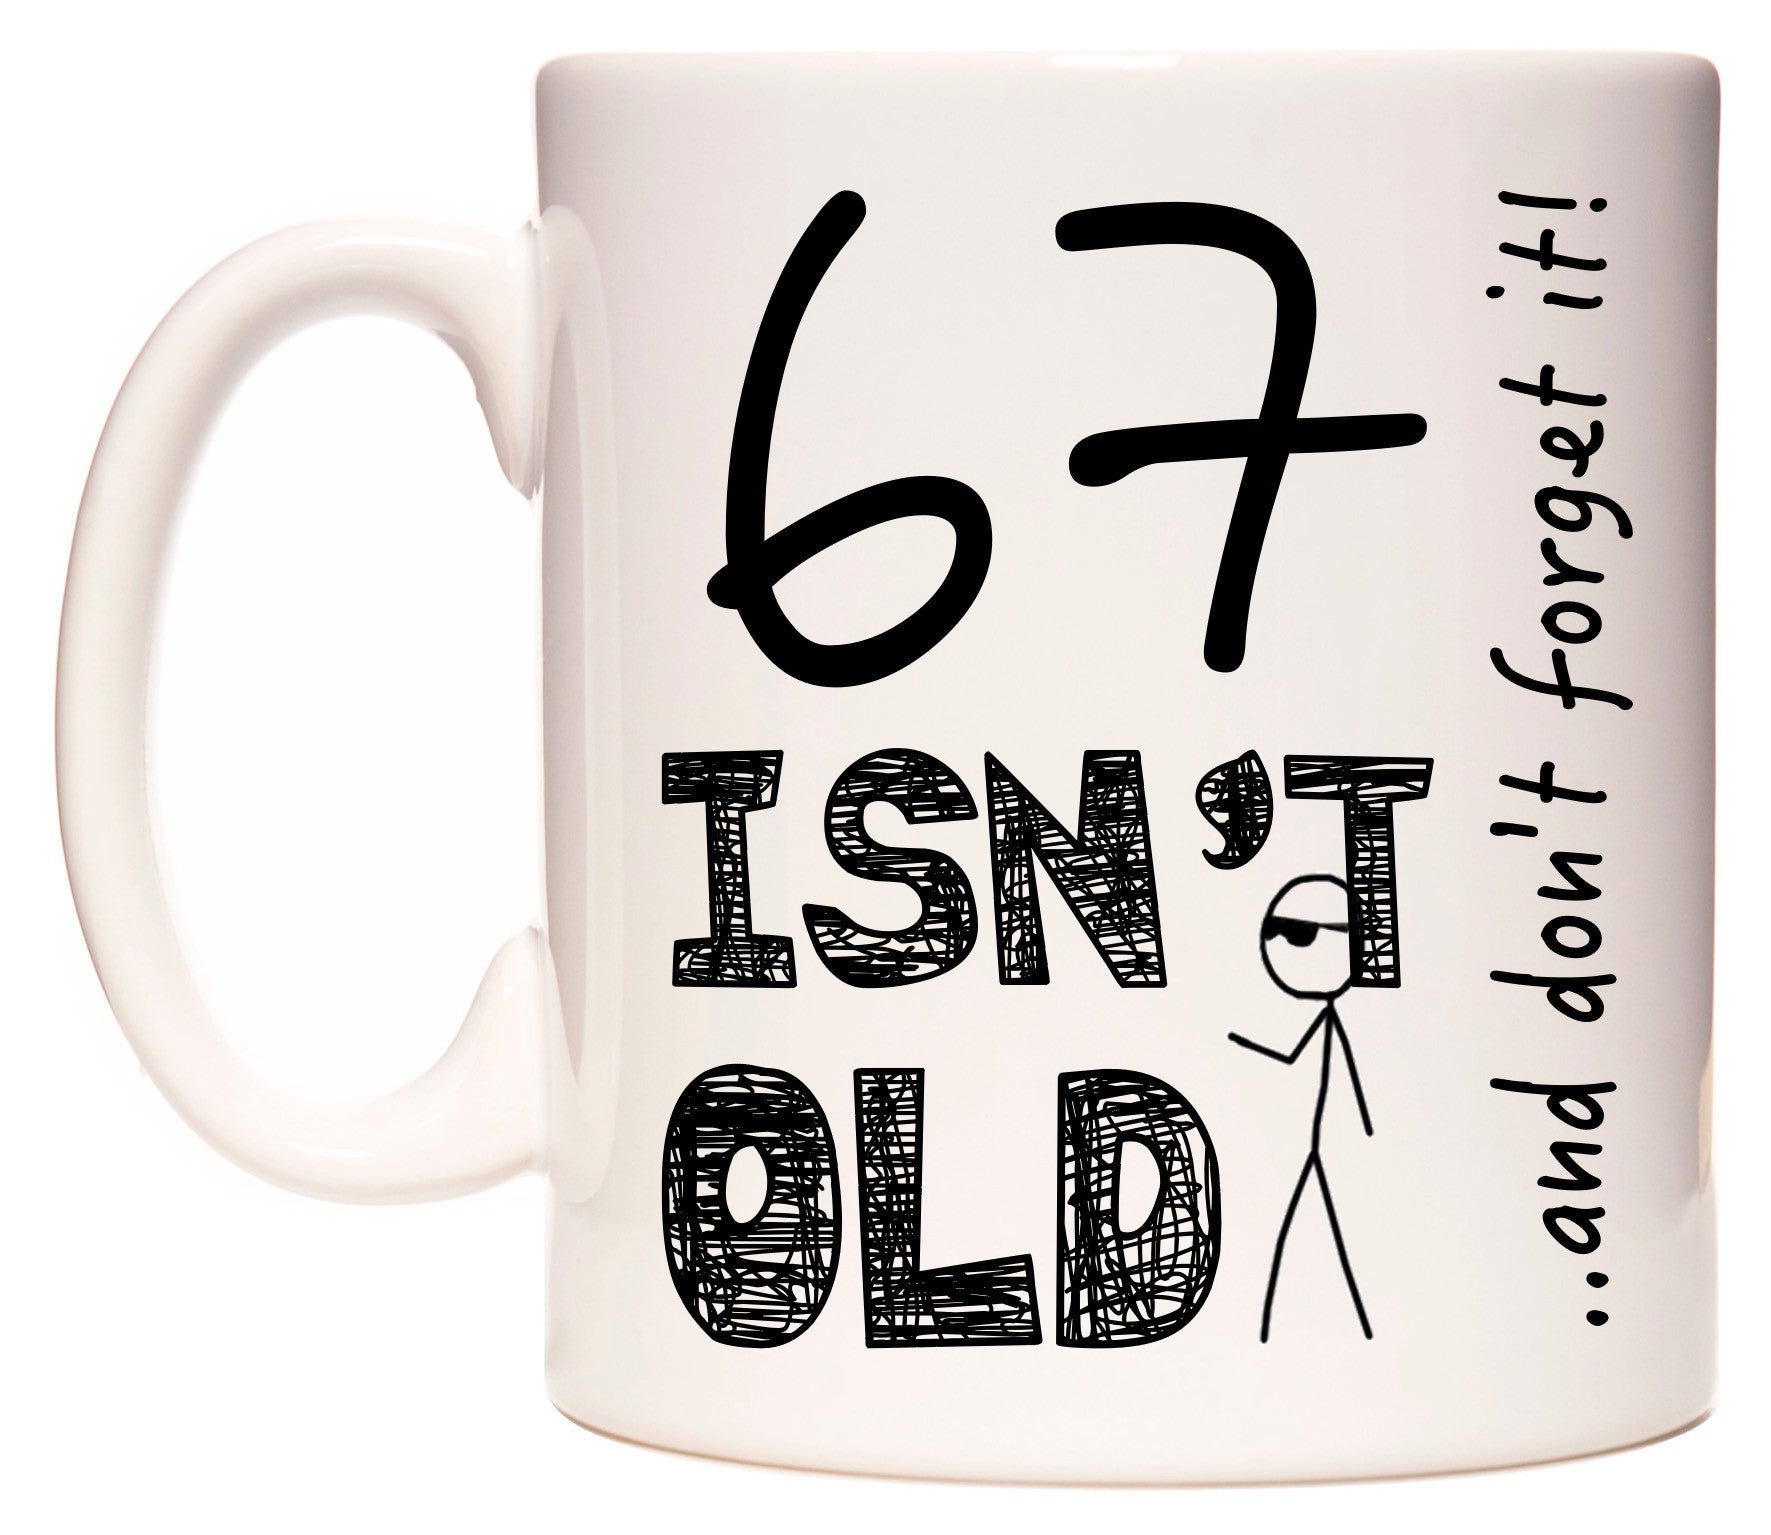 This mug features 67 Isn't Old